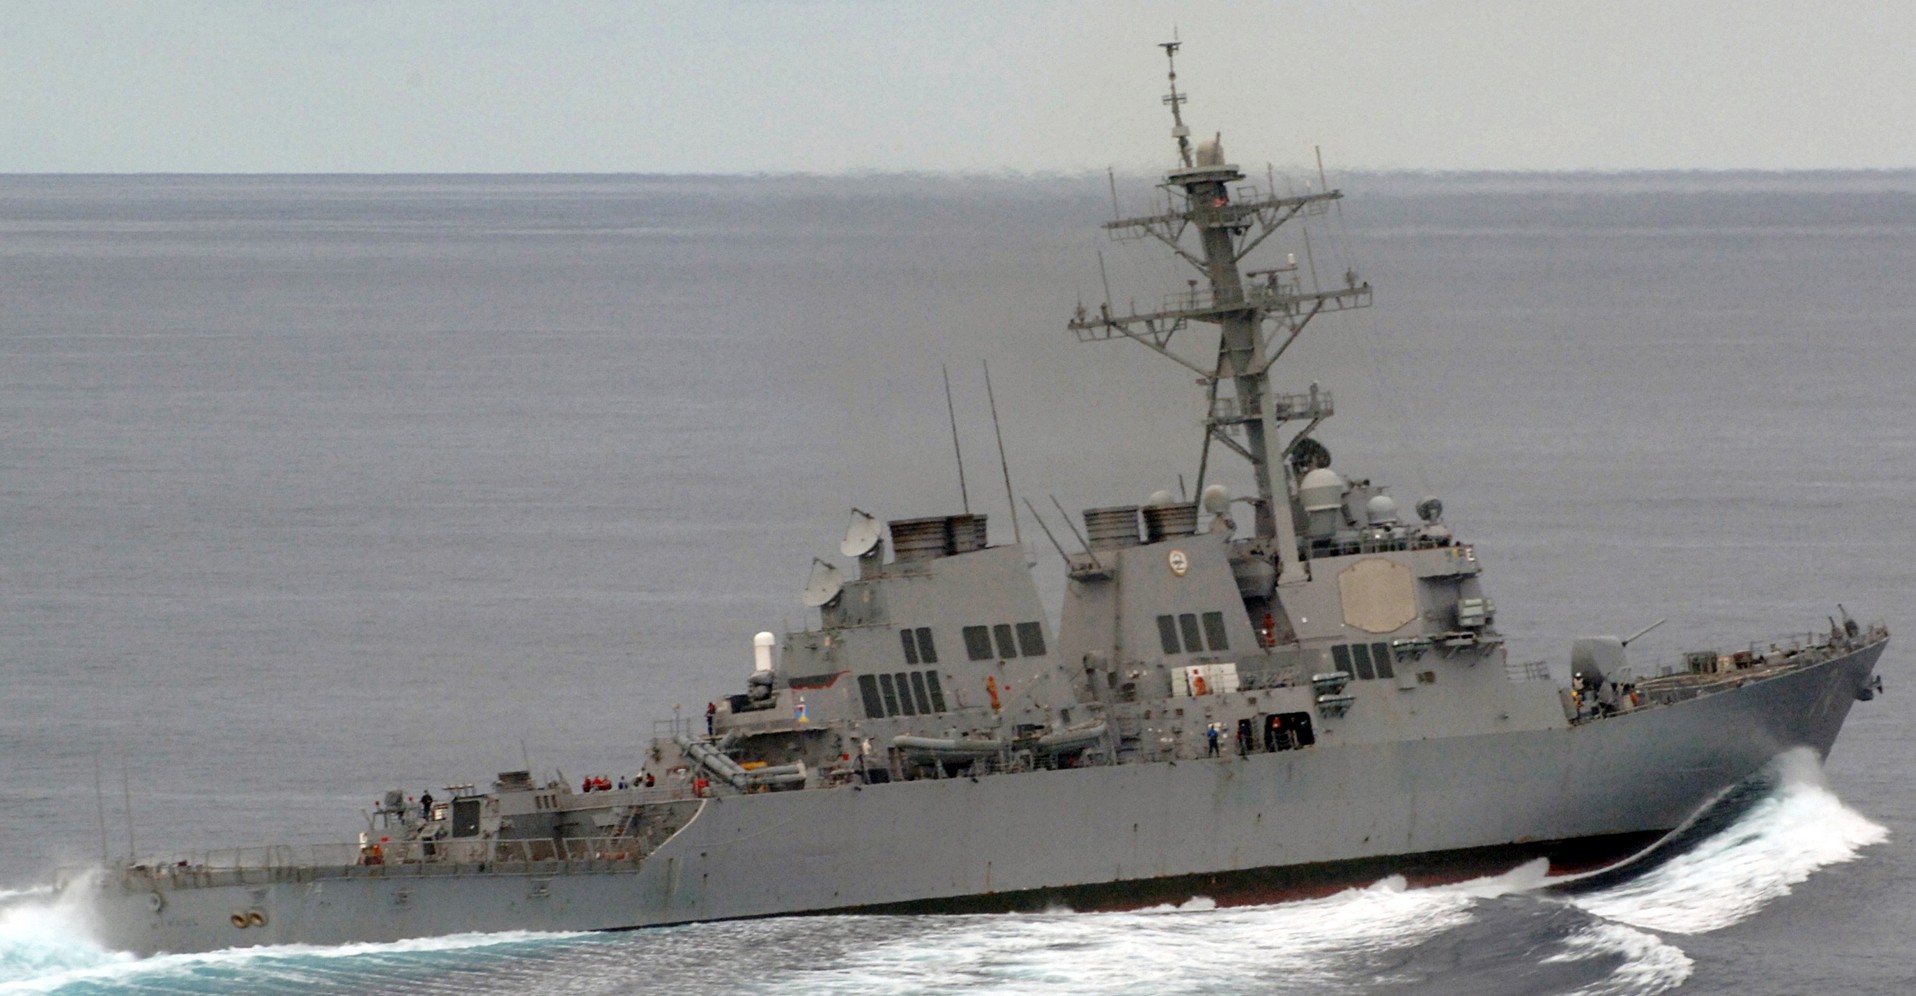 ddg-74 uss mcfaul guided missile destroyer arleigh burke class aegis bmd 45